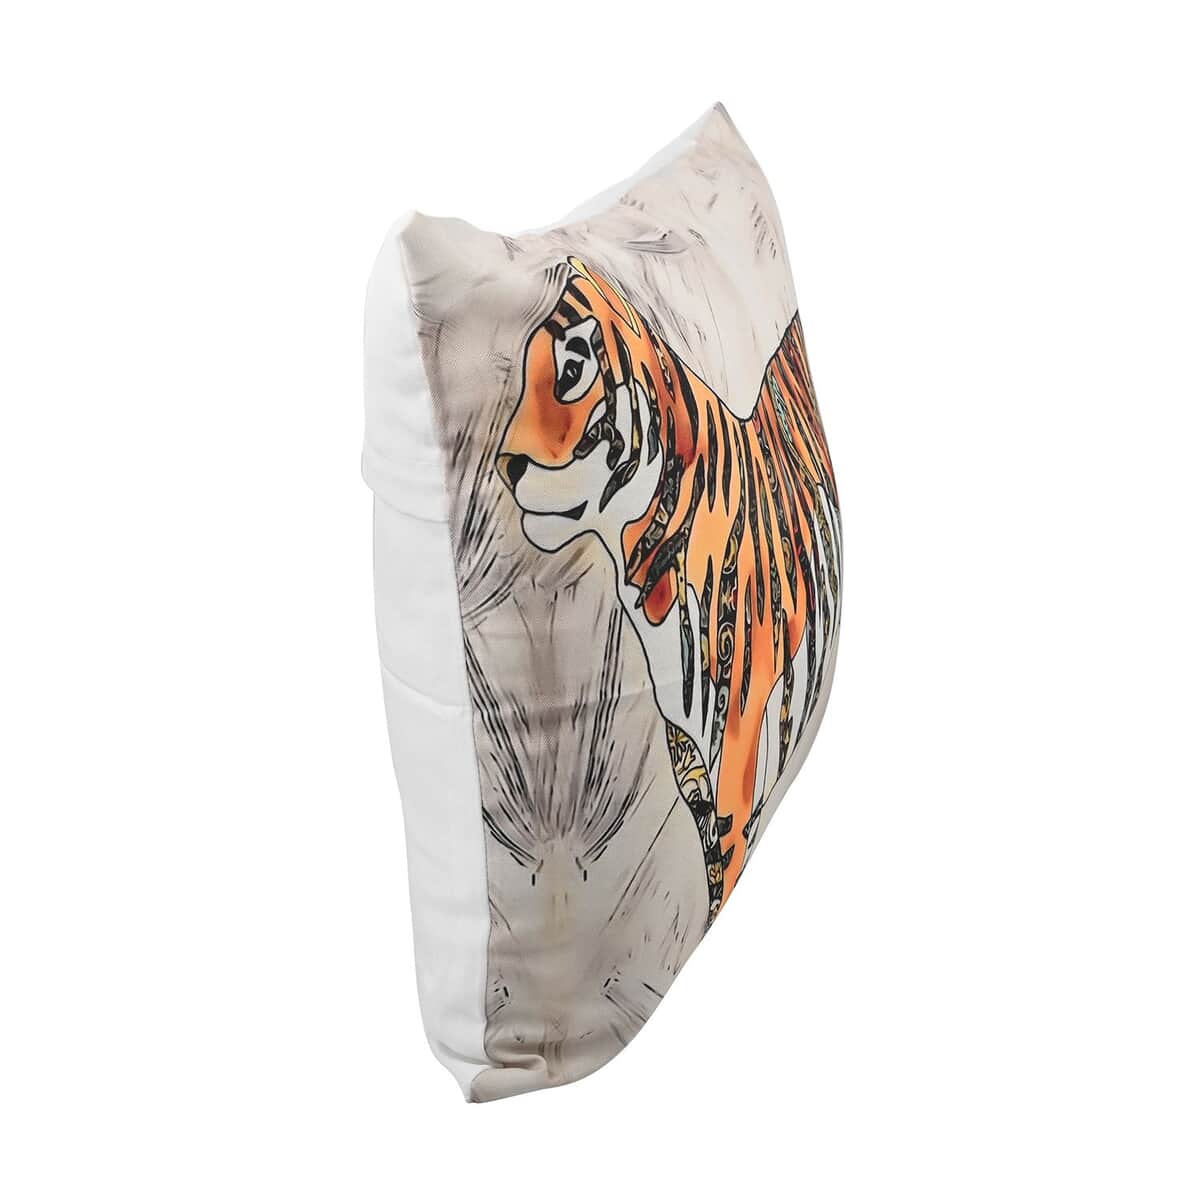 Homesmart Set of 2 100% Polyester Cushion Covers, Tiger Print Cushion Covers, Dark Orange Cushion Covers Set image number 2